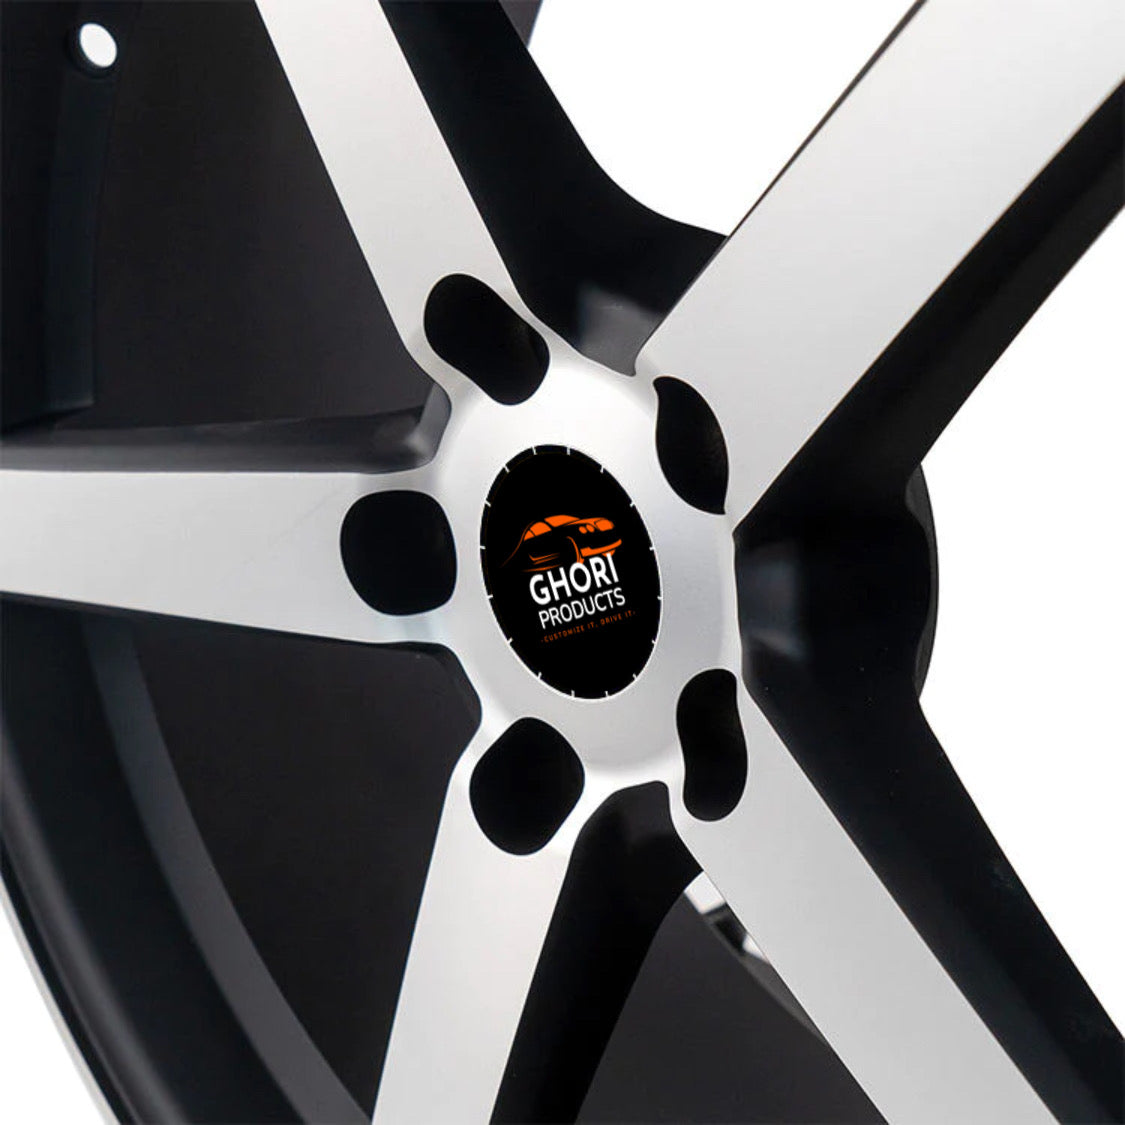 StealthCraft T314 - Forged Aluminum Wheels for Tesla Model X 5X120 (Set of 4)